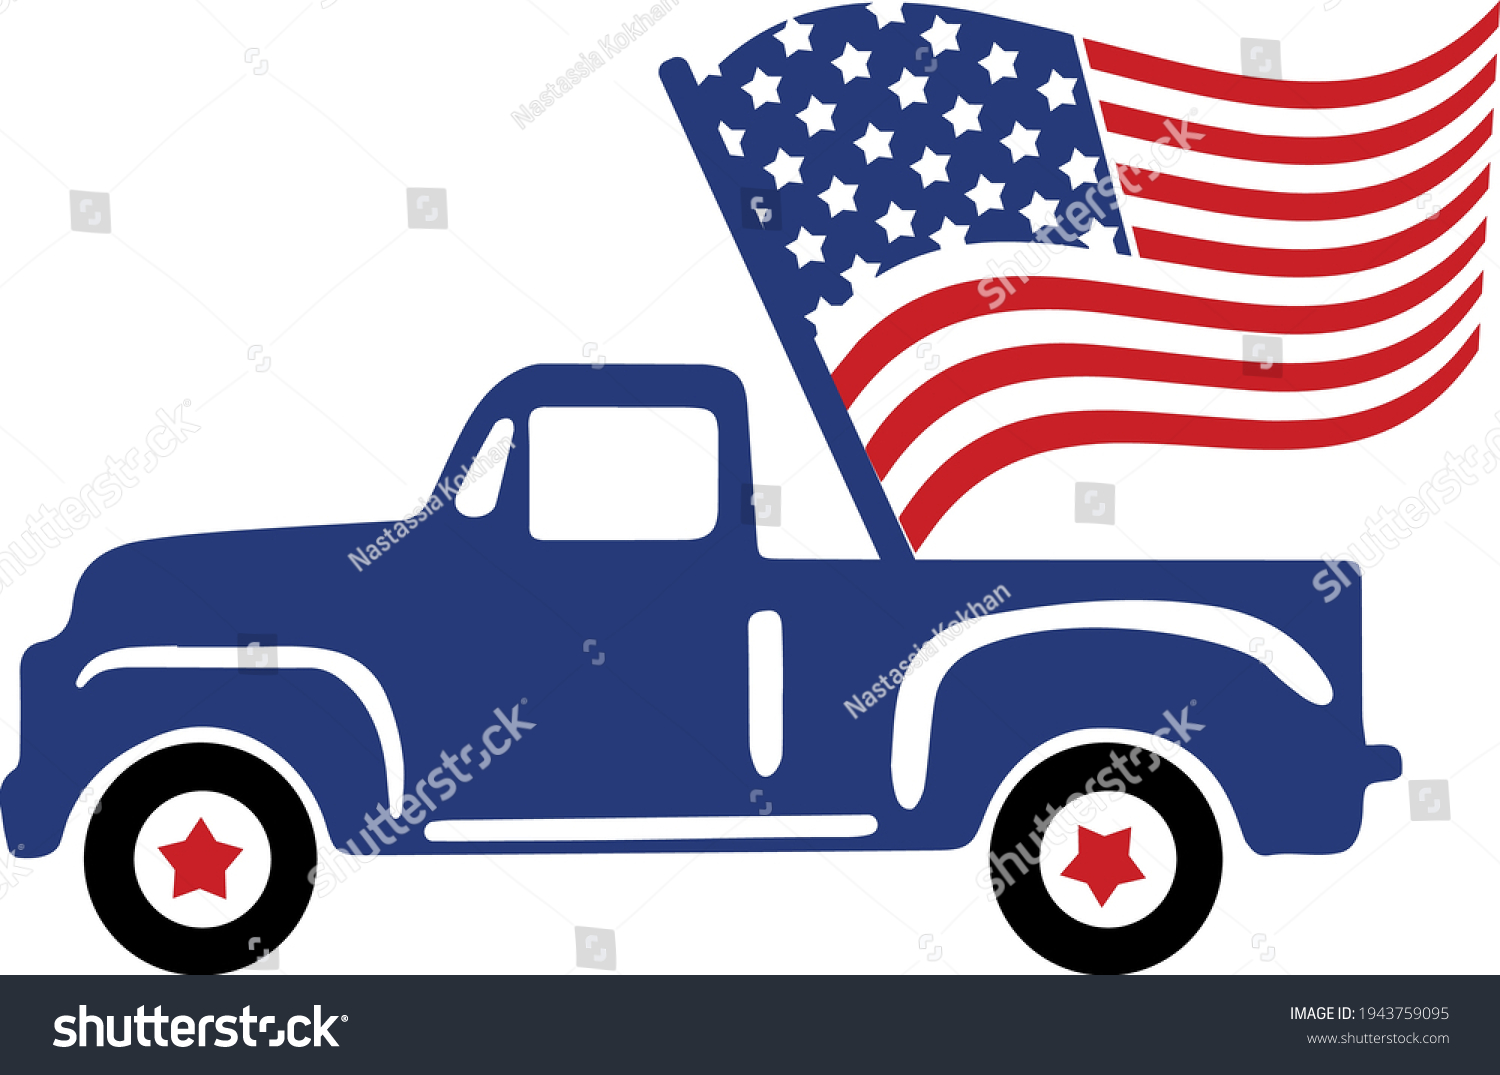 SVG of 4th of July Svg vector Illustration isolated on white background. Independence day party decor. 4th of July truck with stars and stripes. Vintage truck Independence day for scrapbooking, card, shirt. svg